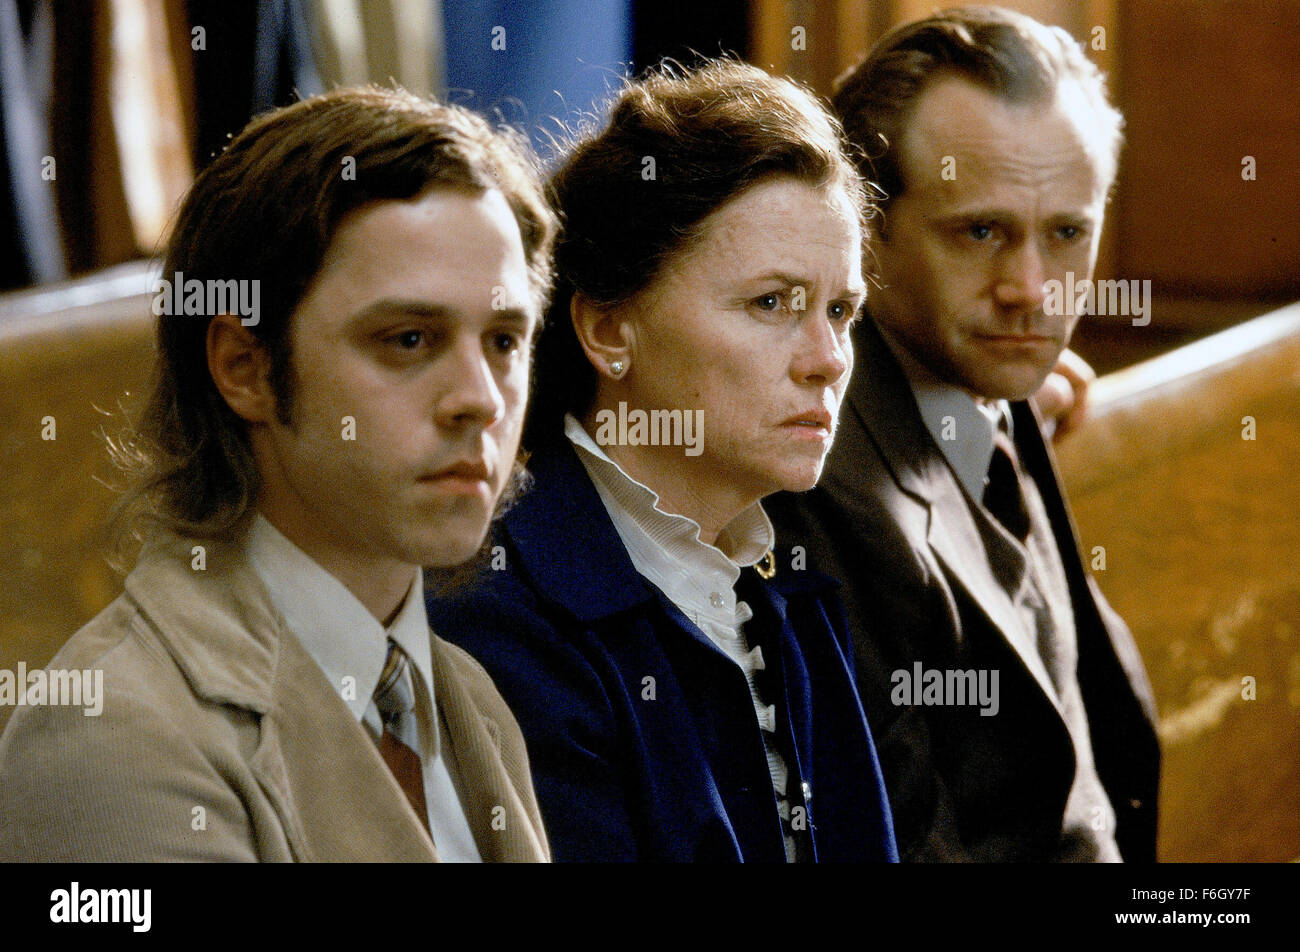 Oct 13, 2001; Hollywood, CA, USA; (from left to right) GIOVANNI RIBISI as Mikal Gilmore, AMY MADIGAN as Bessie Gilmore, and LEE TERGESEN as Frank Gilmore Jr. in the crime, drama, thriller ''Shot in the Heart'' directed by Agnieszka Holland. Stock Photo